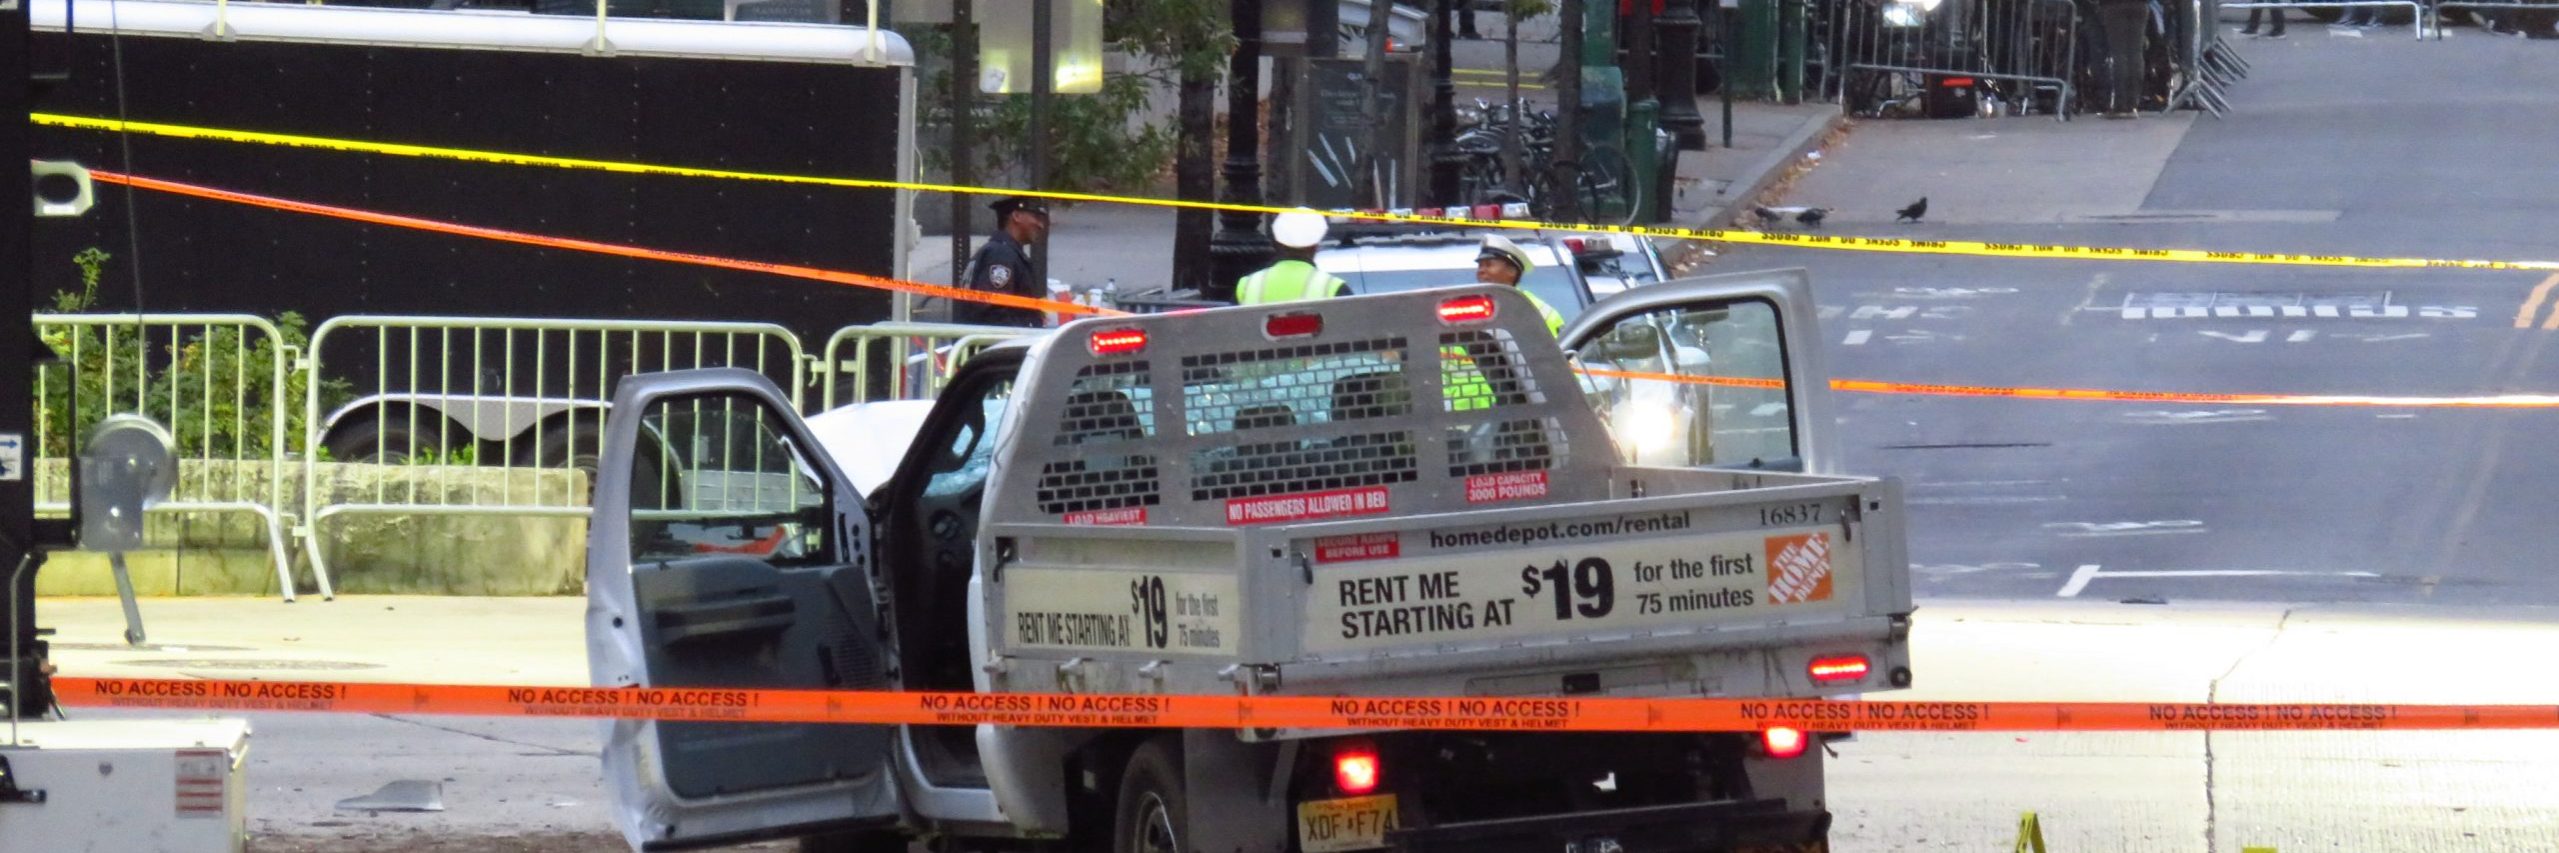 The truck used by Saipov in his attack.